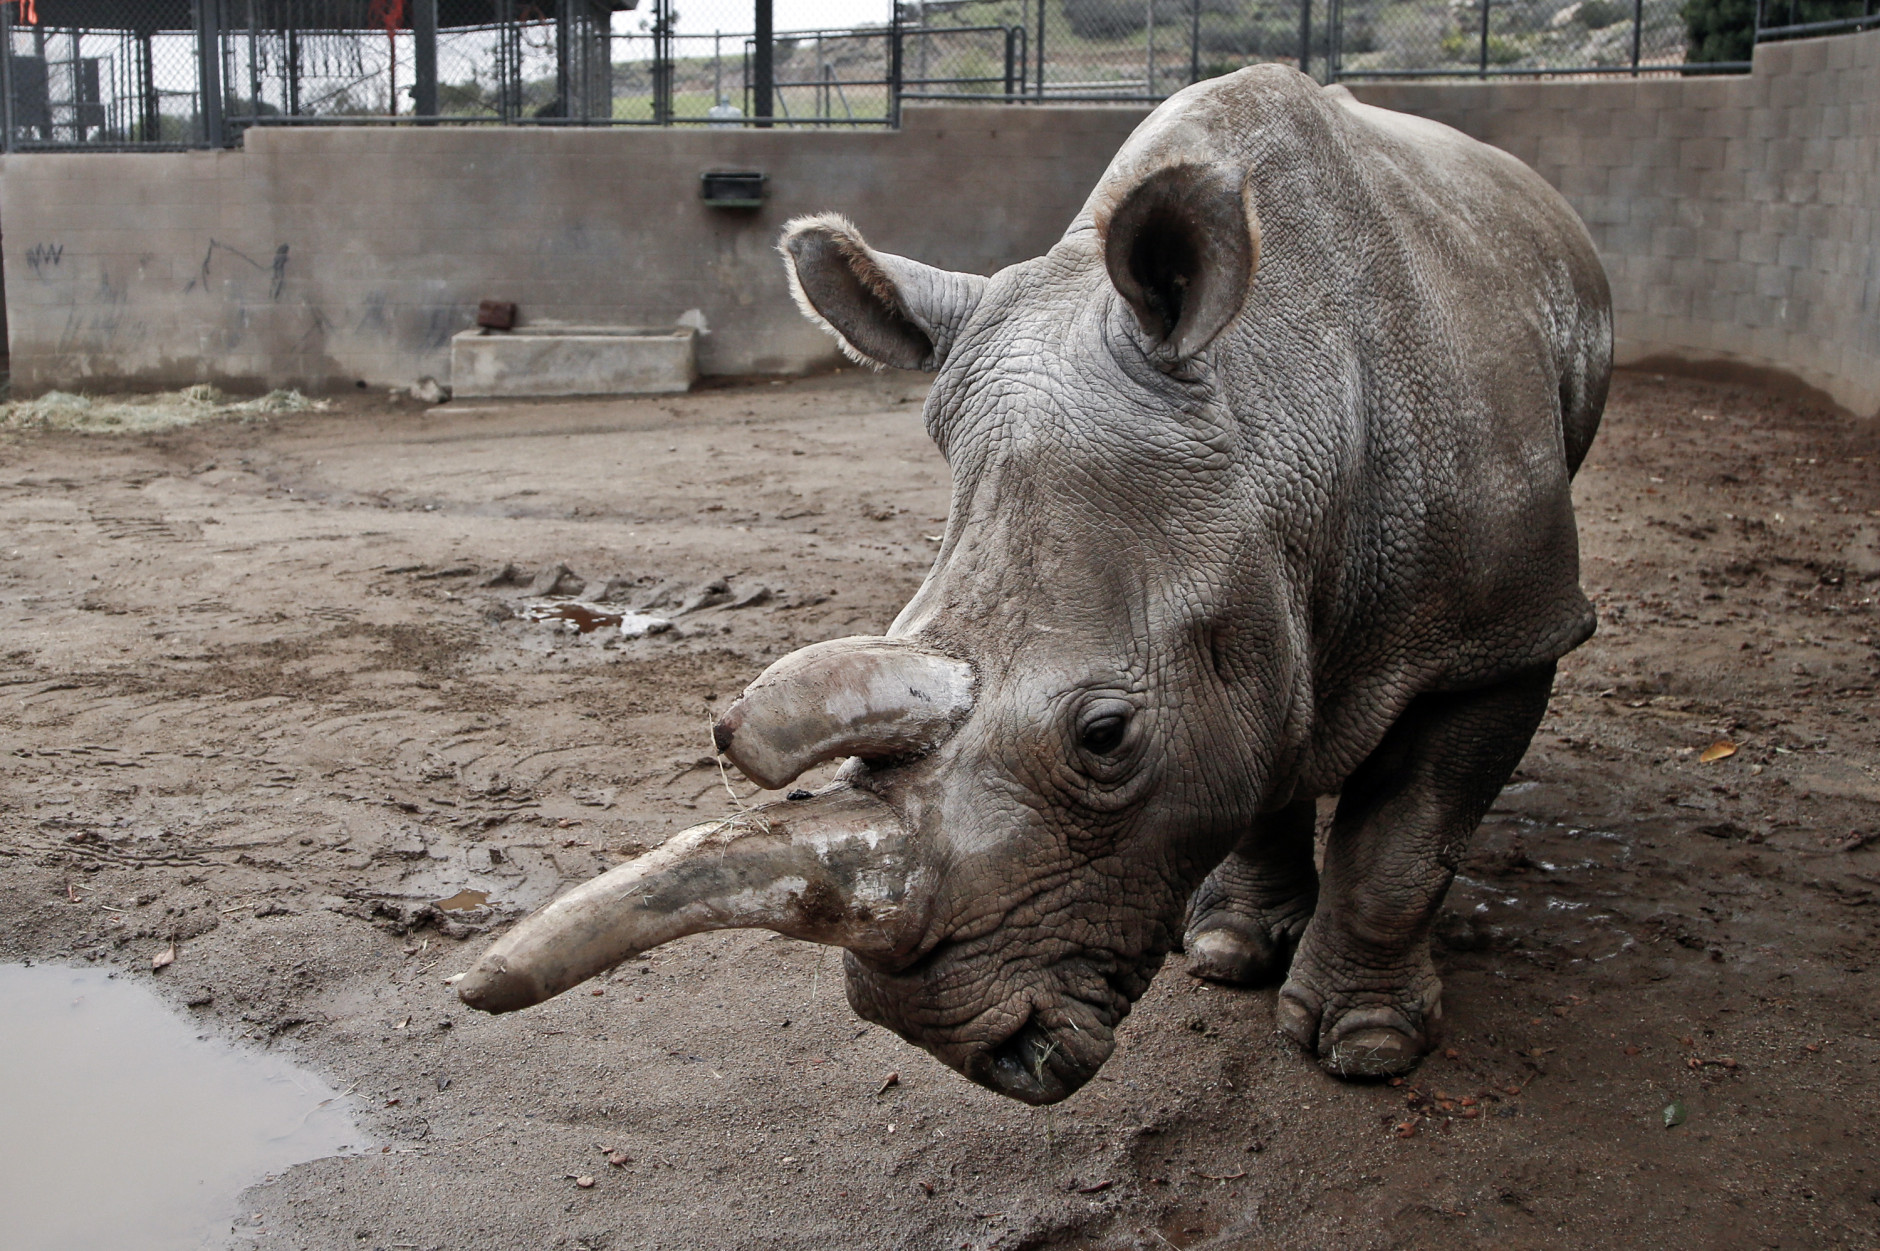 FILE - This Dec. 31, 2014 file photo shows Nola, a northern white rhinoceros, in her enclosure at the San Diego Zoo Safari Park in Escondido, Calif. The Los Angeles Times reports that Zoo officials say Nola, 41, was euthanized early Sunday, Nov. 22, 2015 as she was suffering from a number of old-age ailments, including arthritis, and had also been treated for a recurring abscess on her hip. The rhino had been a draw at the Safari Park since 1986.(AP Photo/Lenny Ignelzi, File)